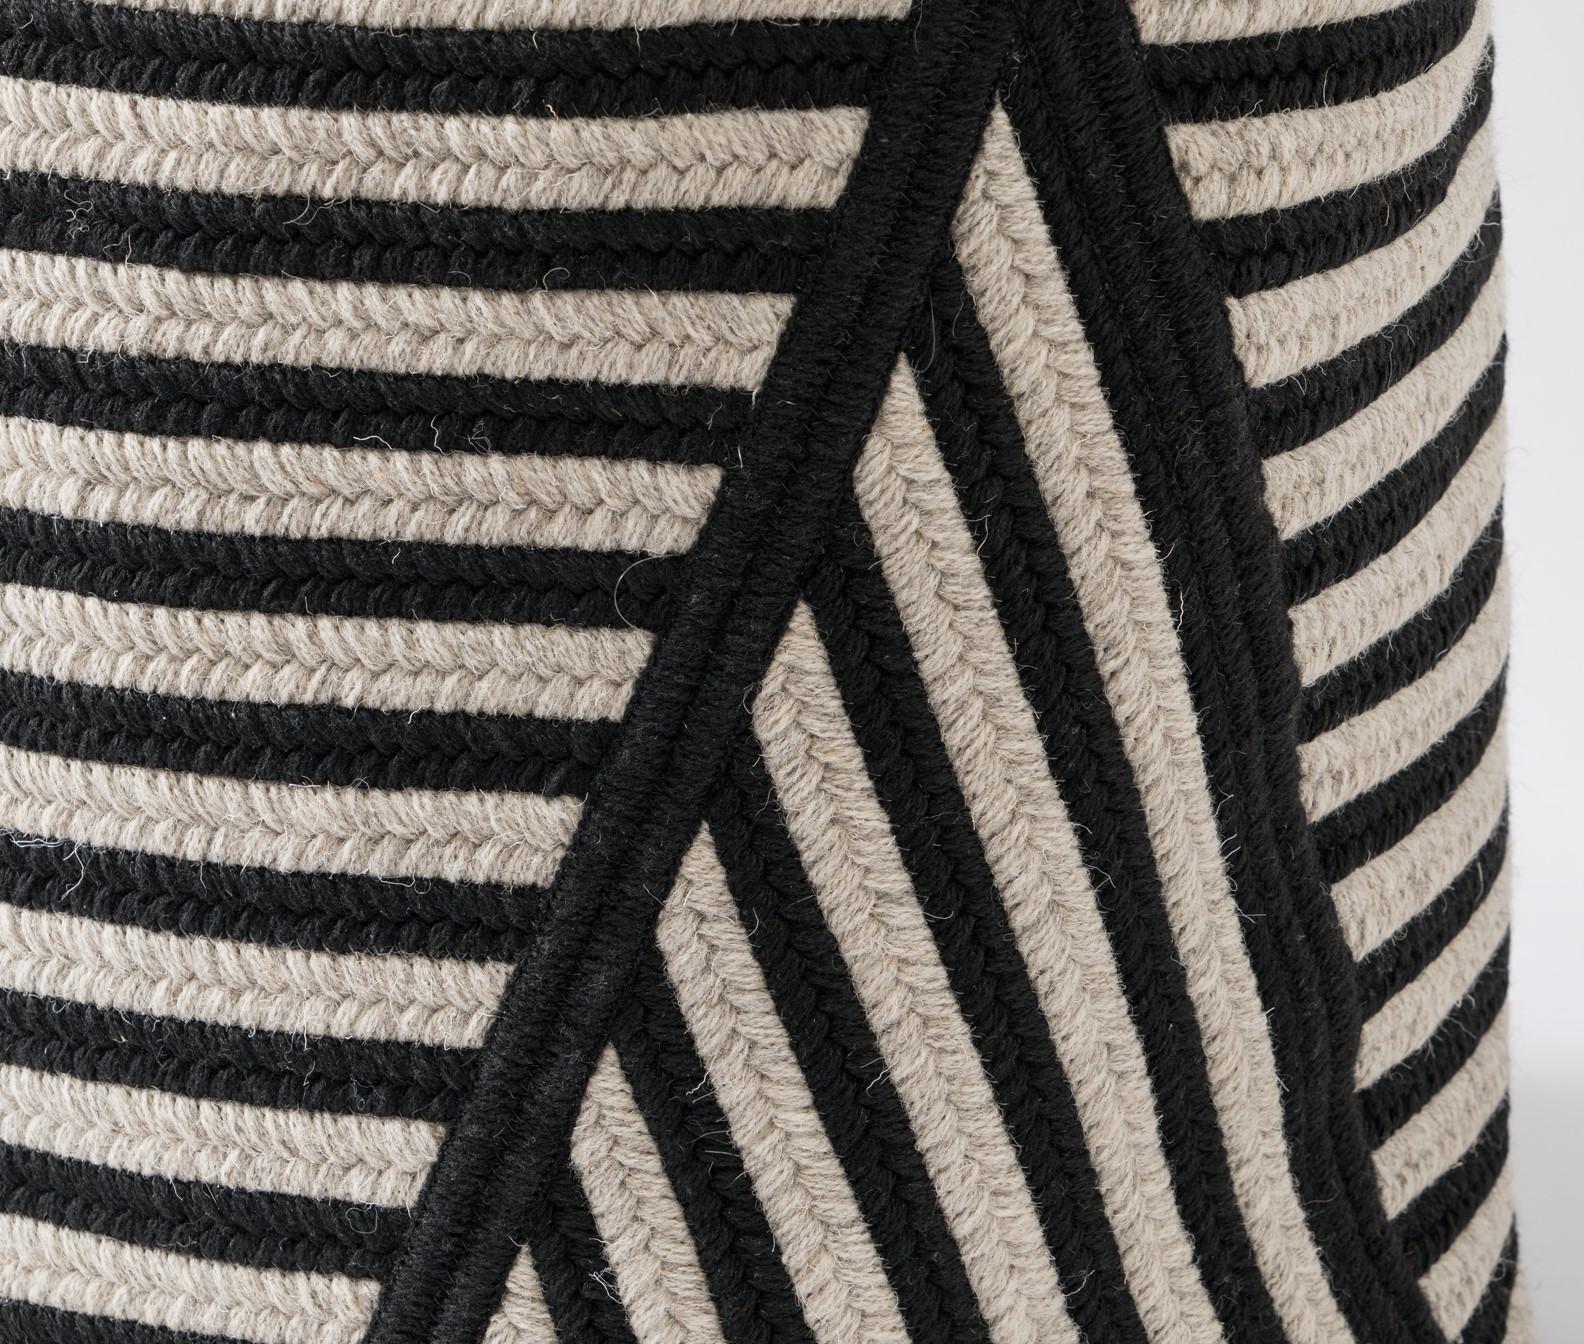 black and white striped basket